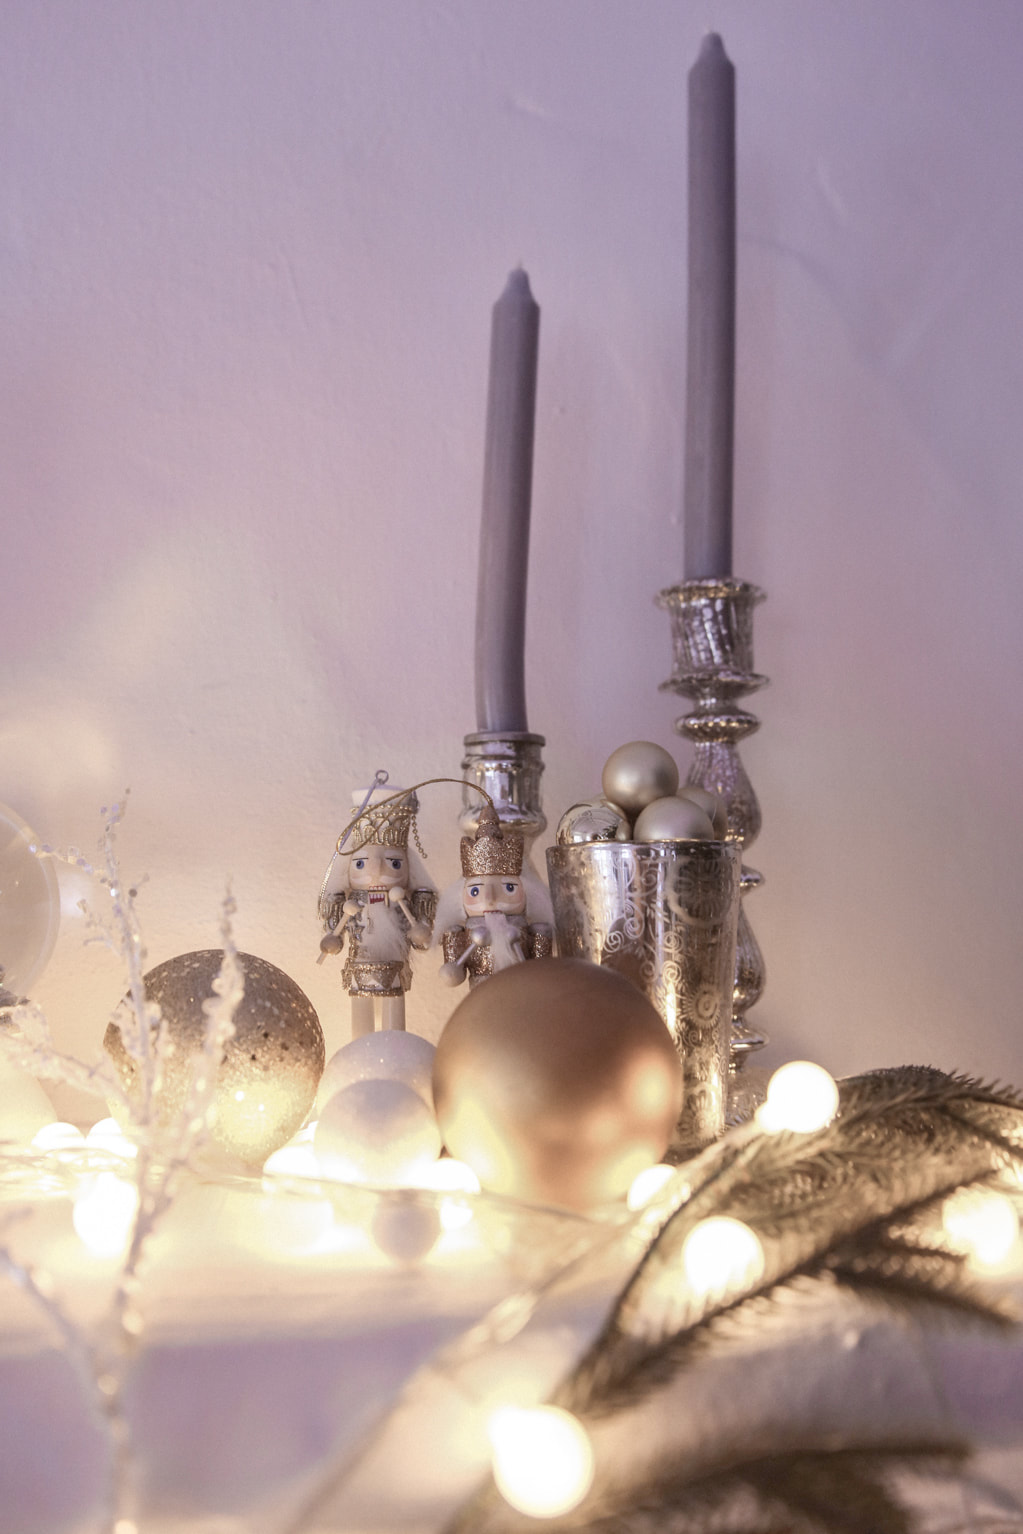 How I decorate for Christmas - Part two by The Belle Blog 